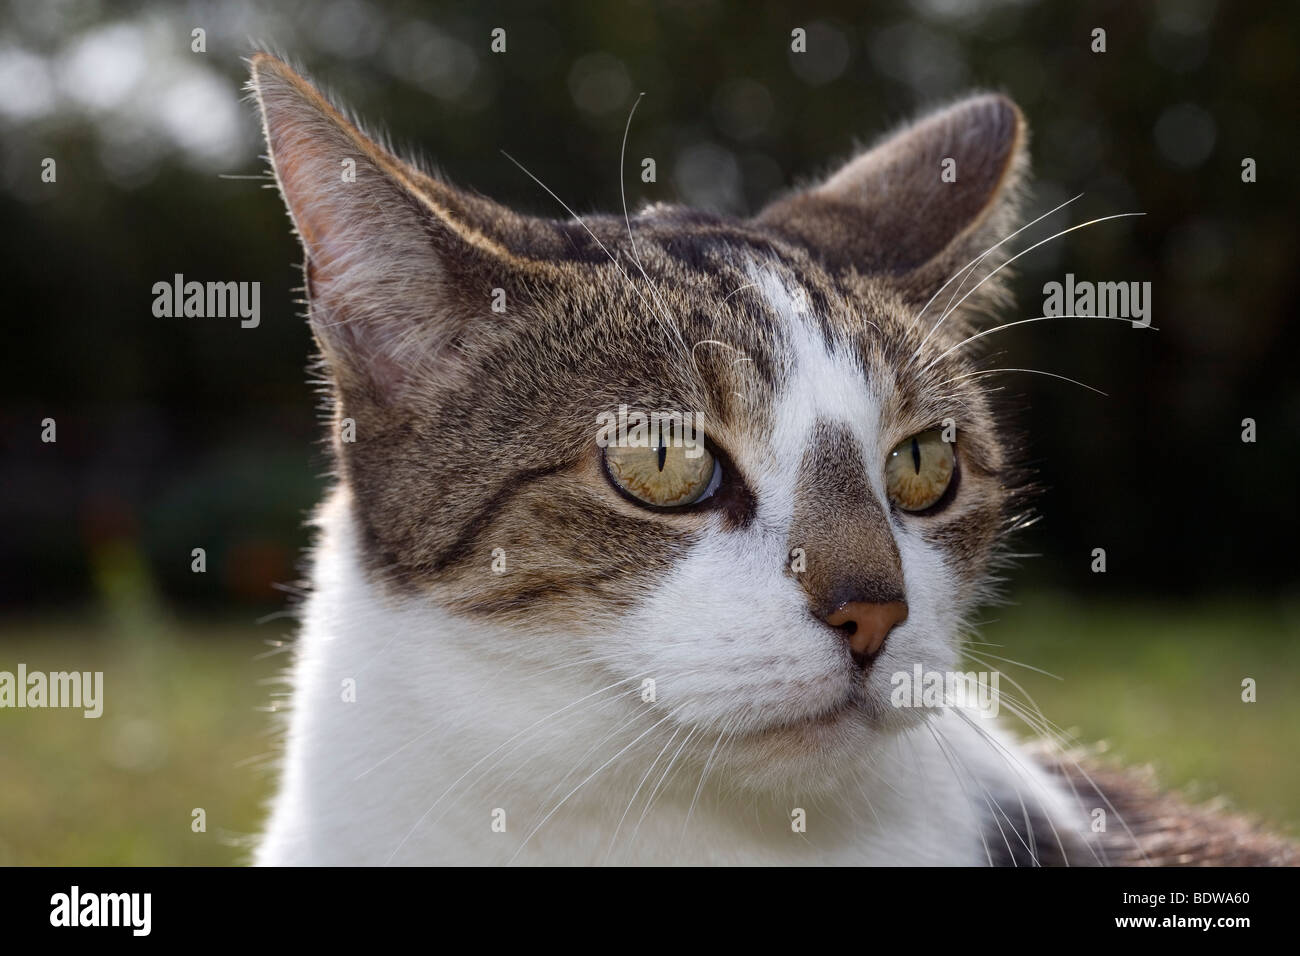 Cat close up, ears back Stock Photo